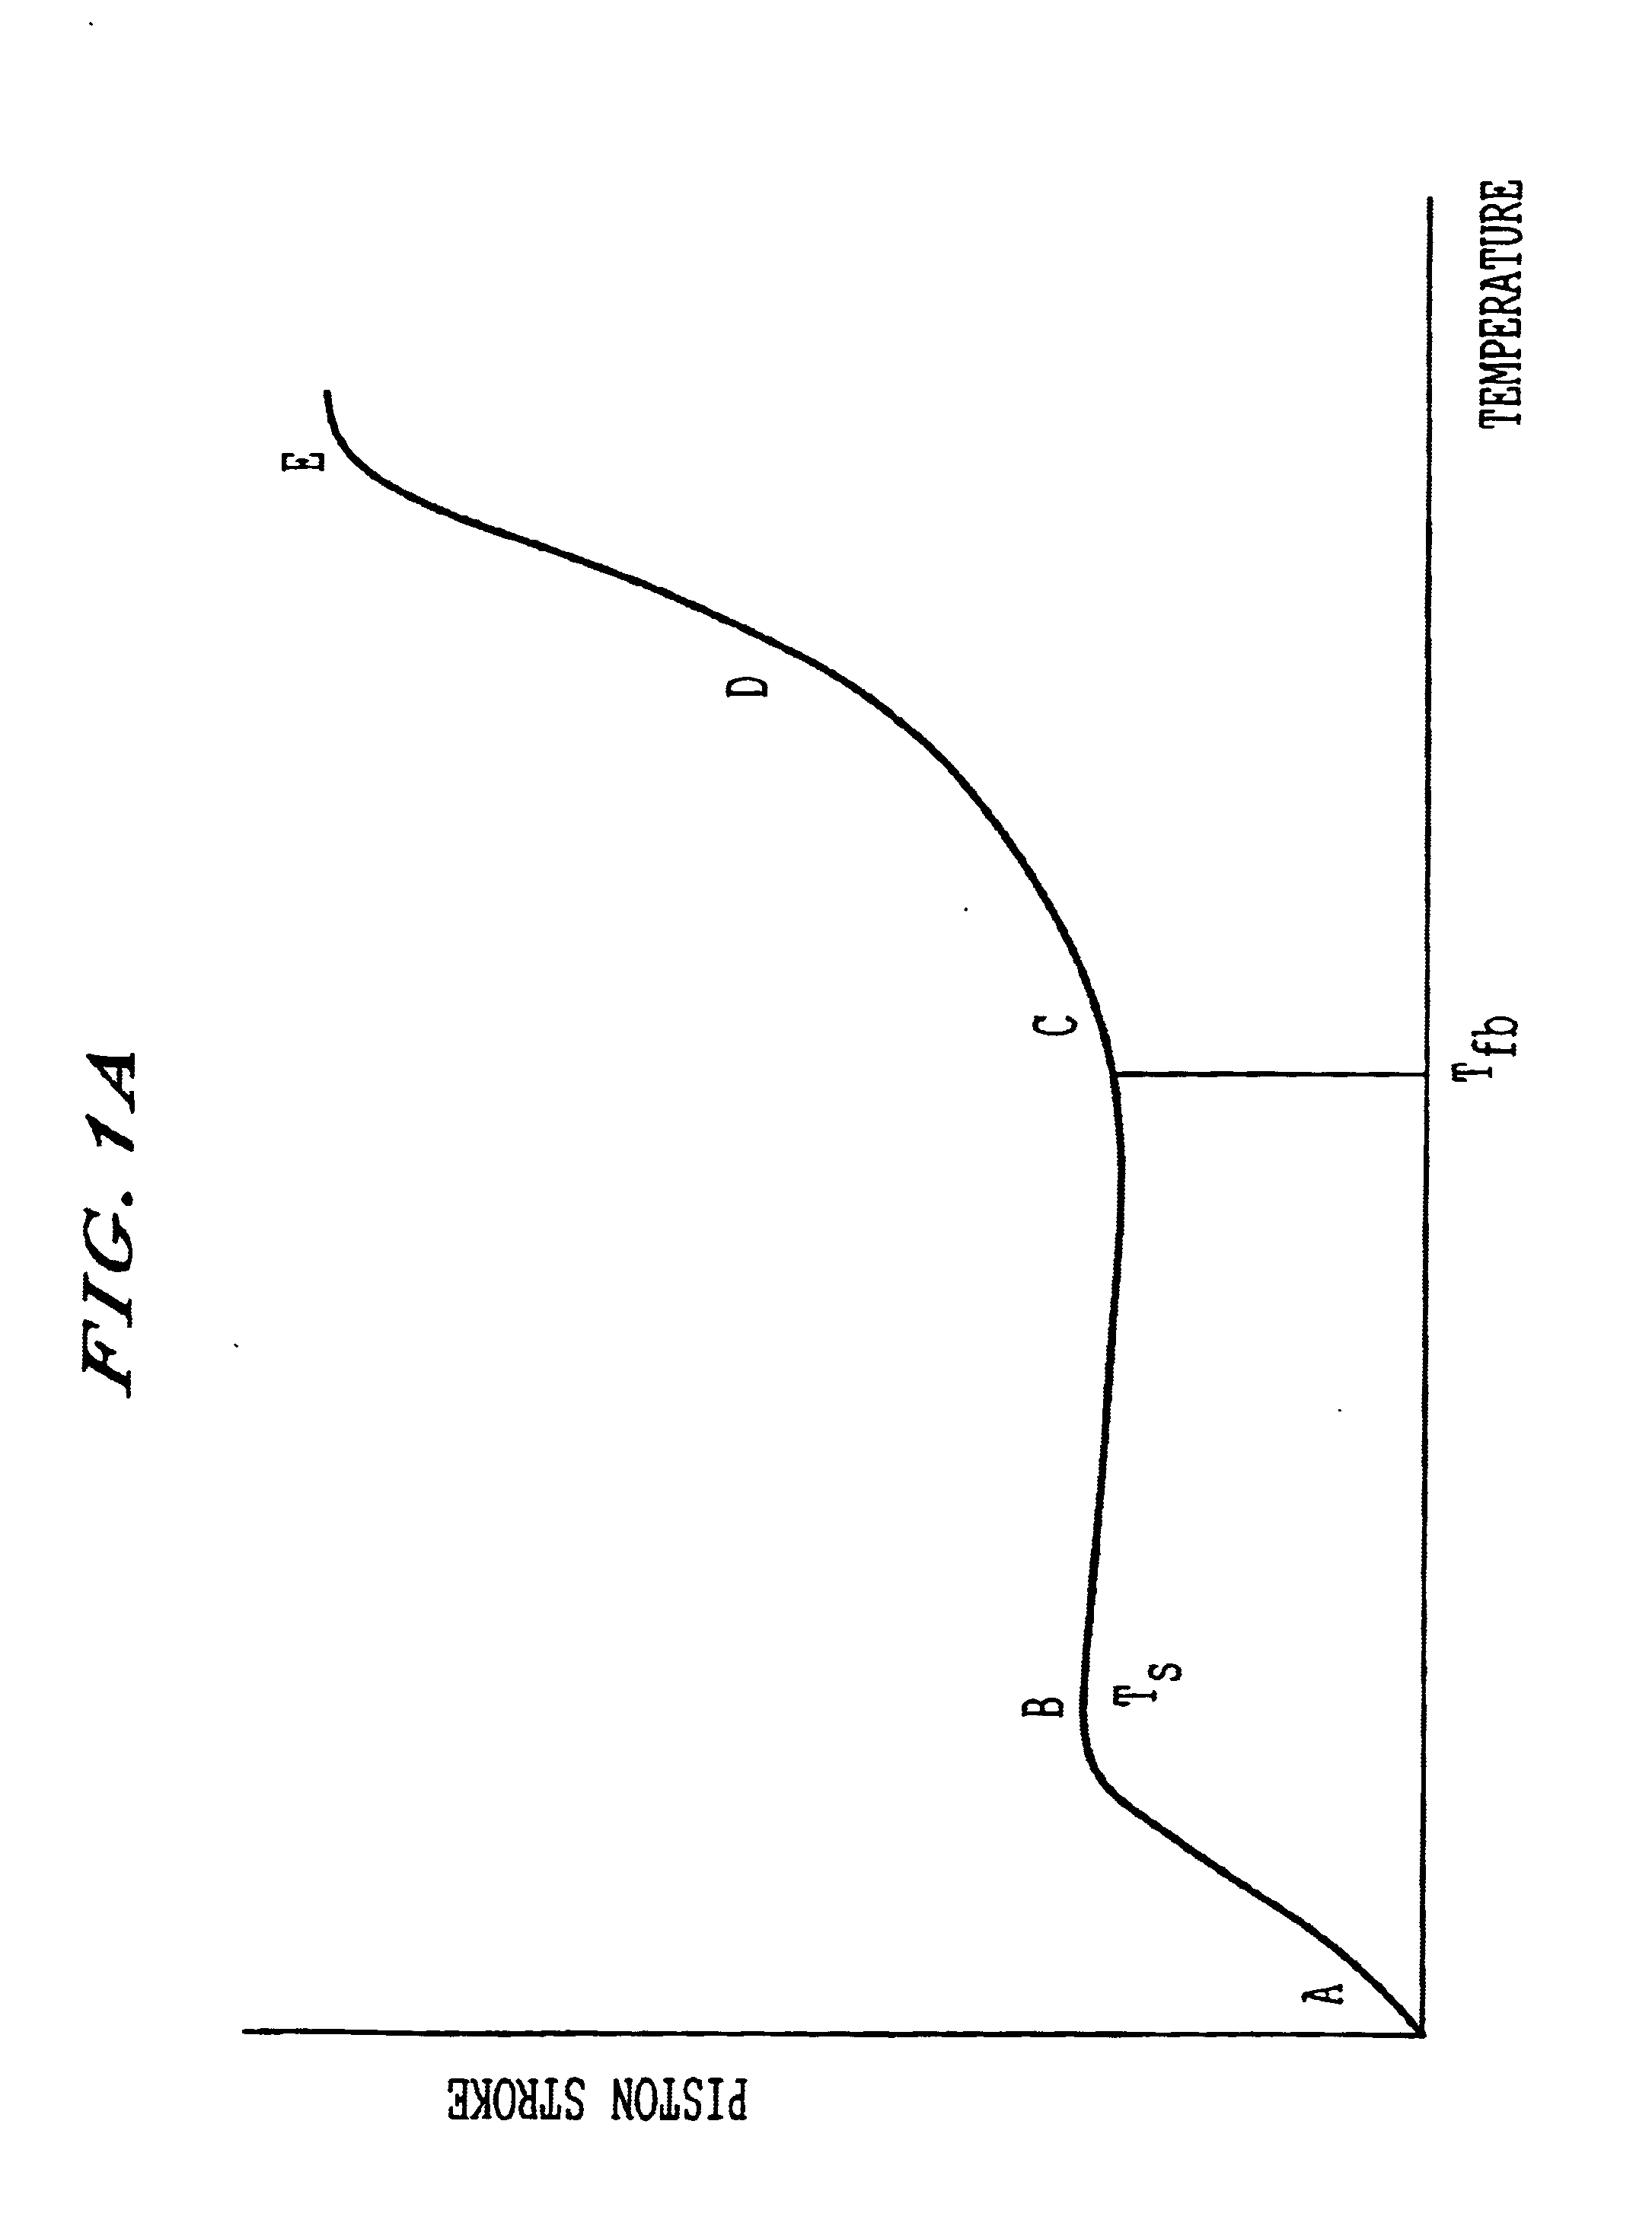 Toner for developing electrostatic latent image, developing method and developing apparatus